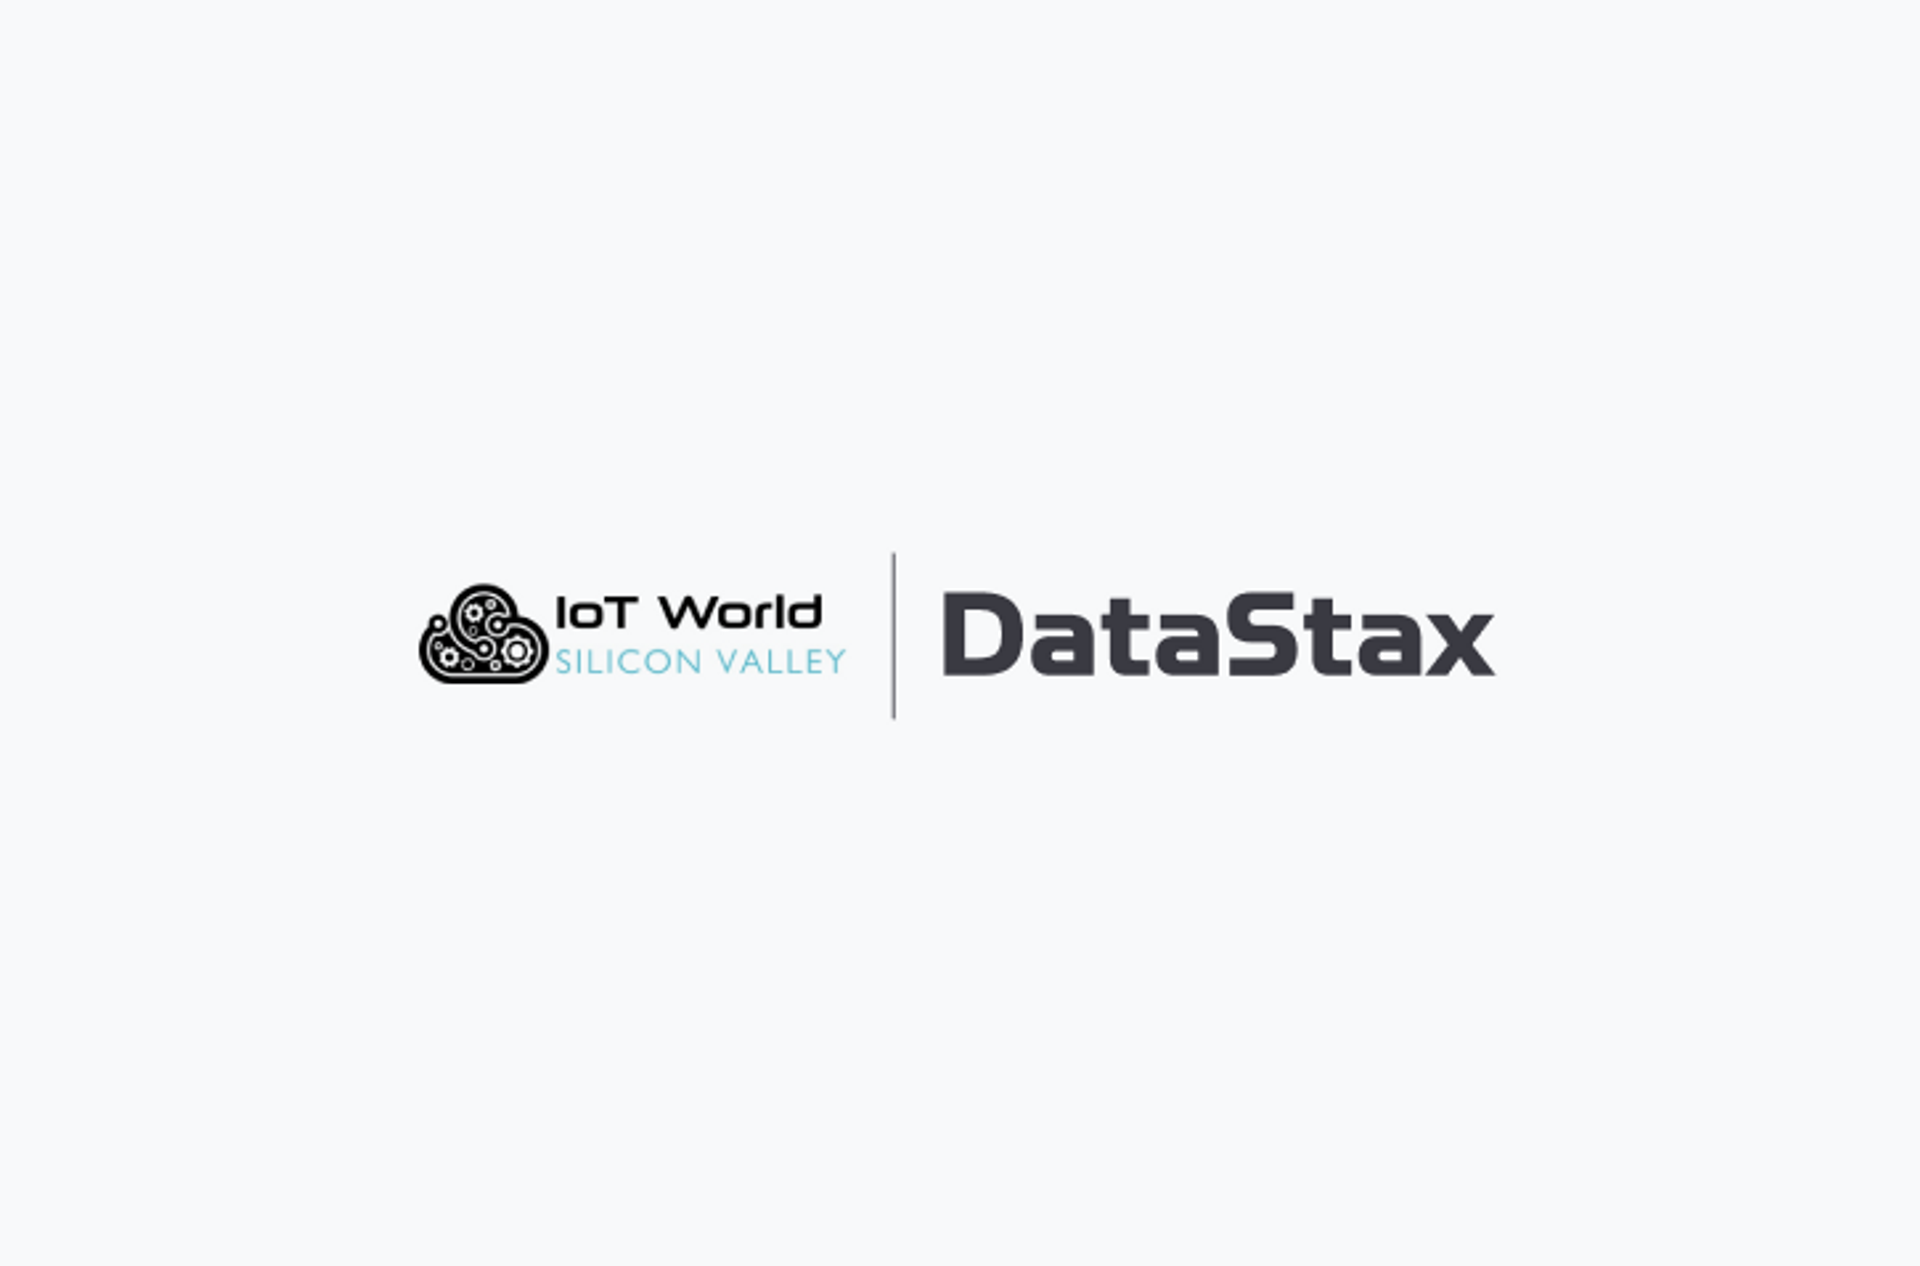 Want to Turbocharge your IoT Data? Meet Us at IoTWorld This Week!